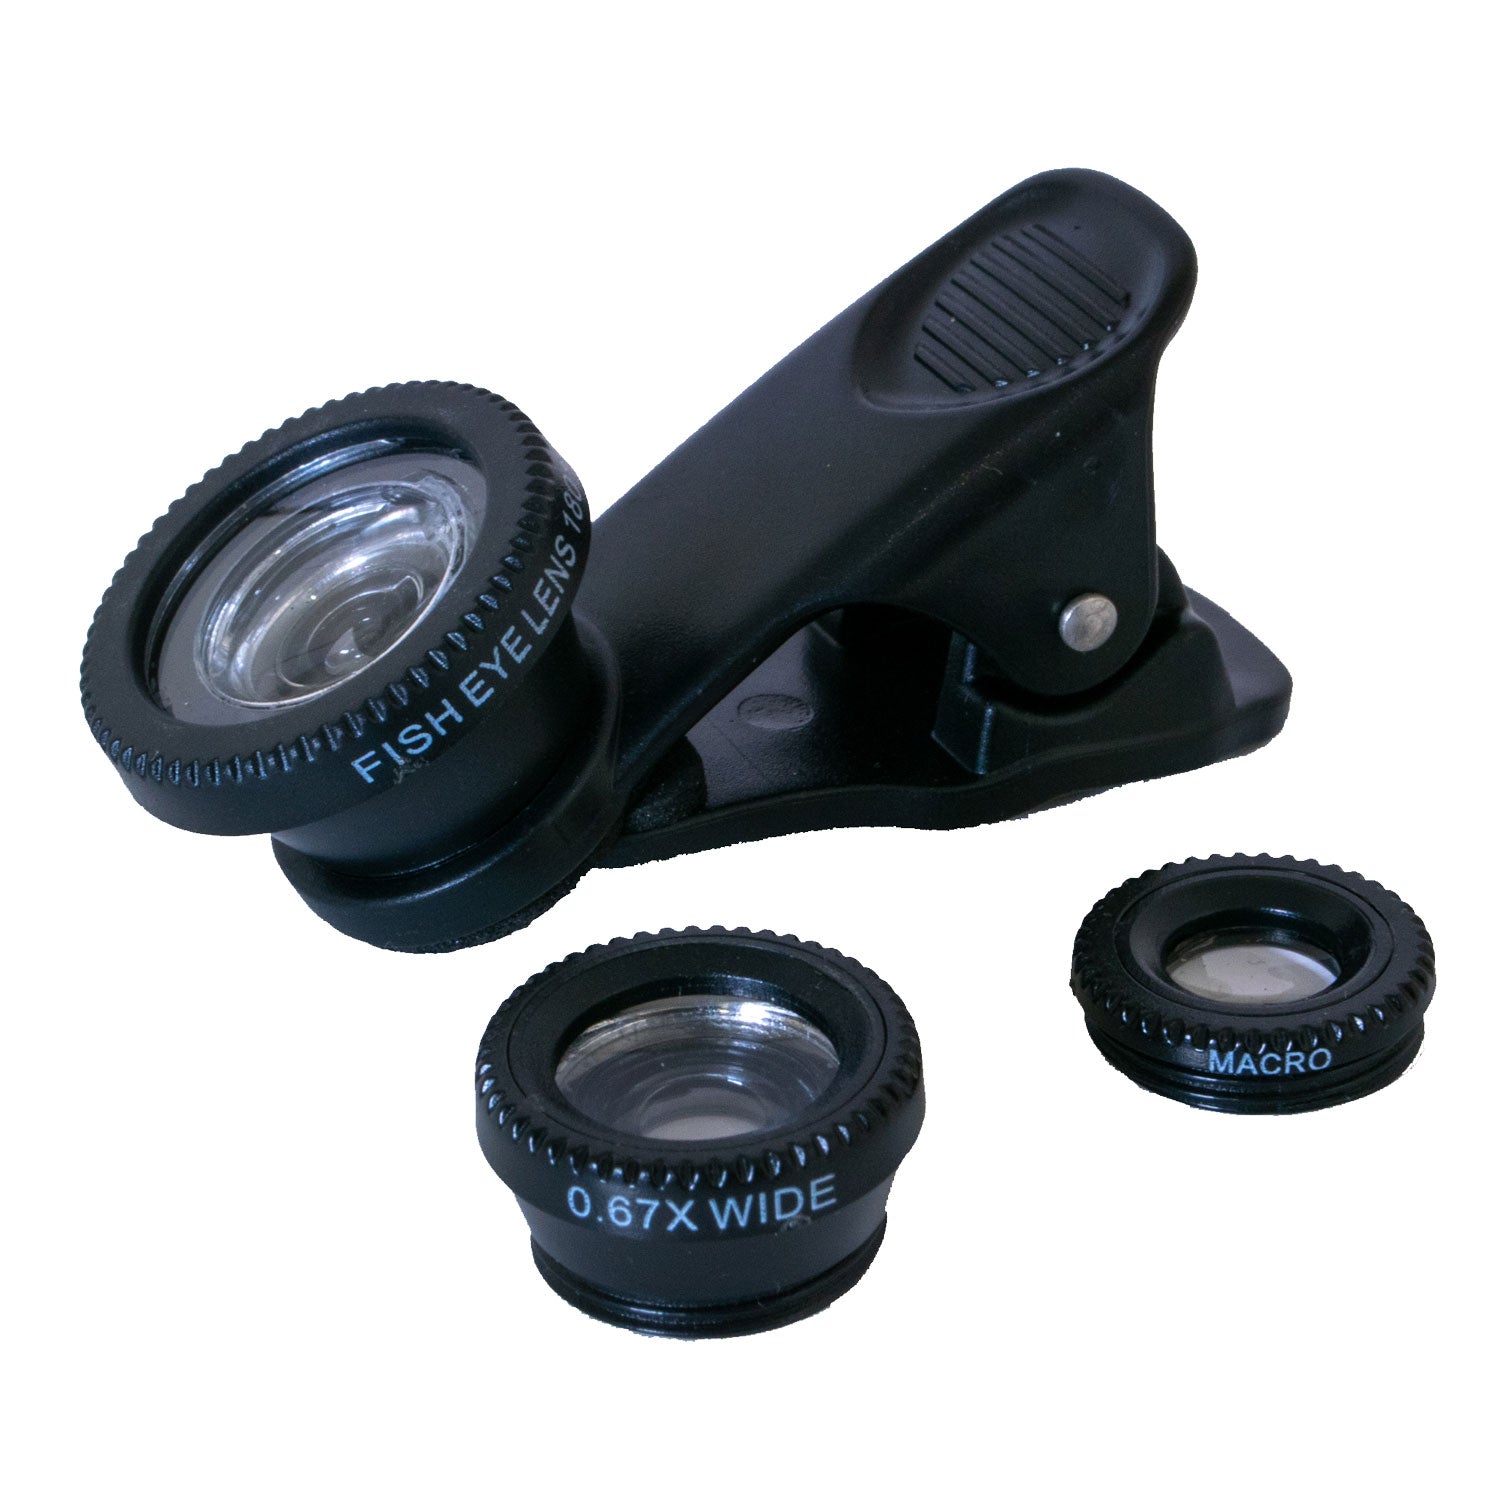 Phone lenses, set of 3, macro (magnifier), wide angle (distance), fisheye (distance)